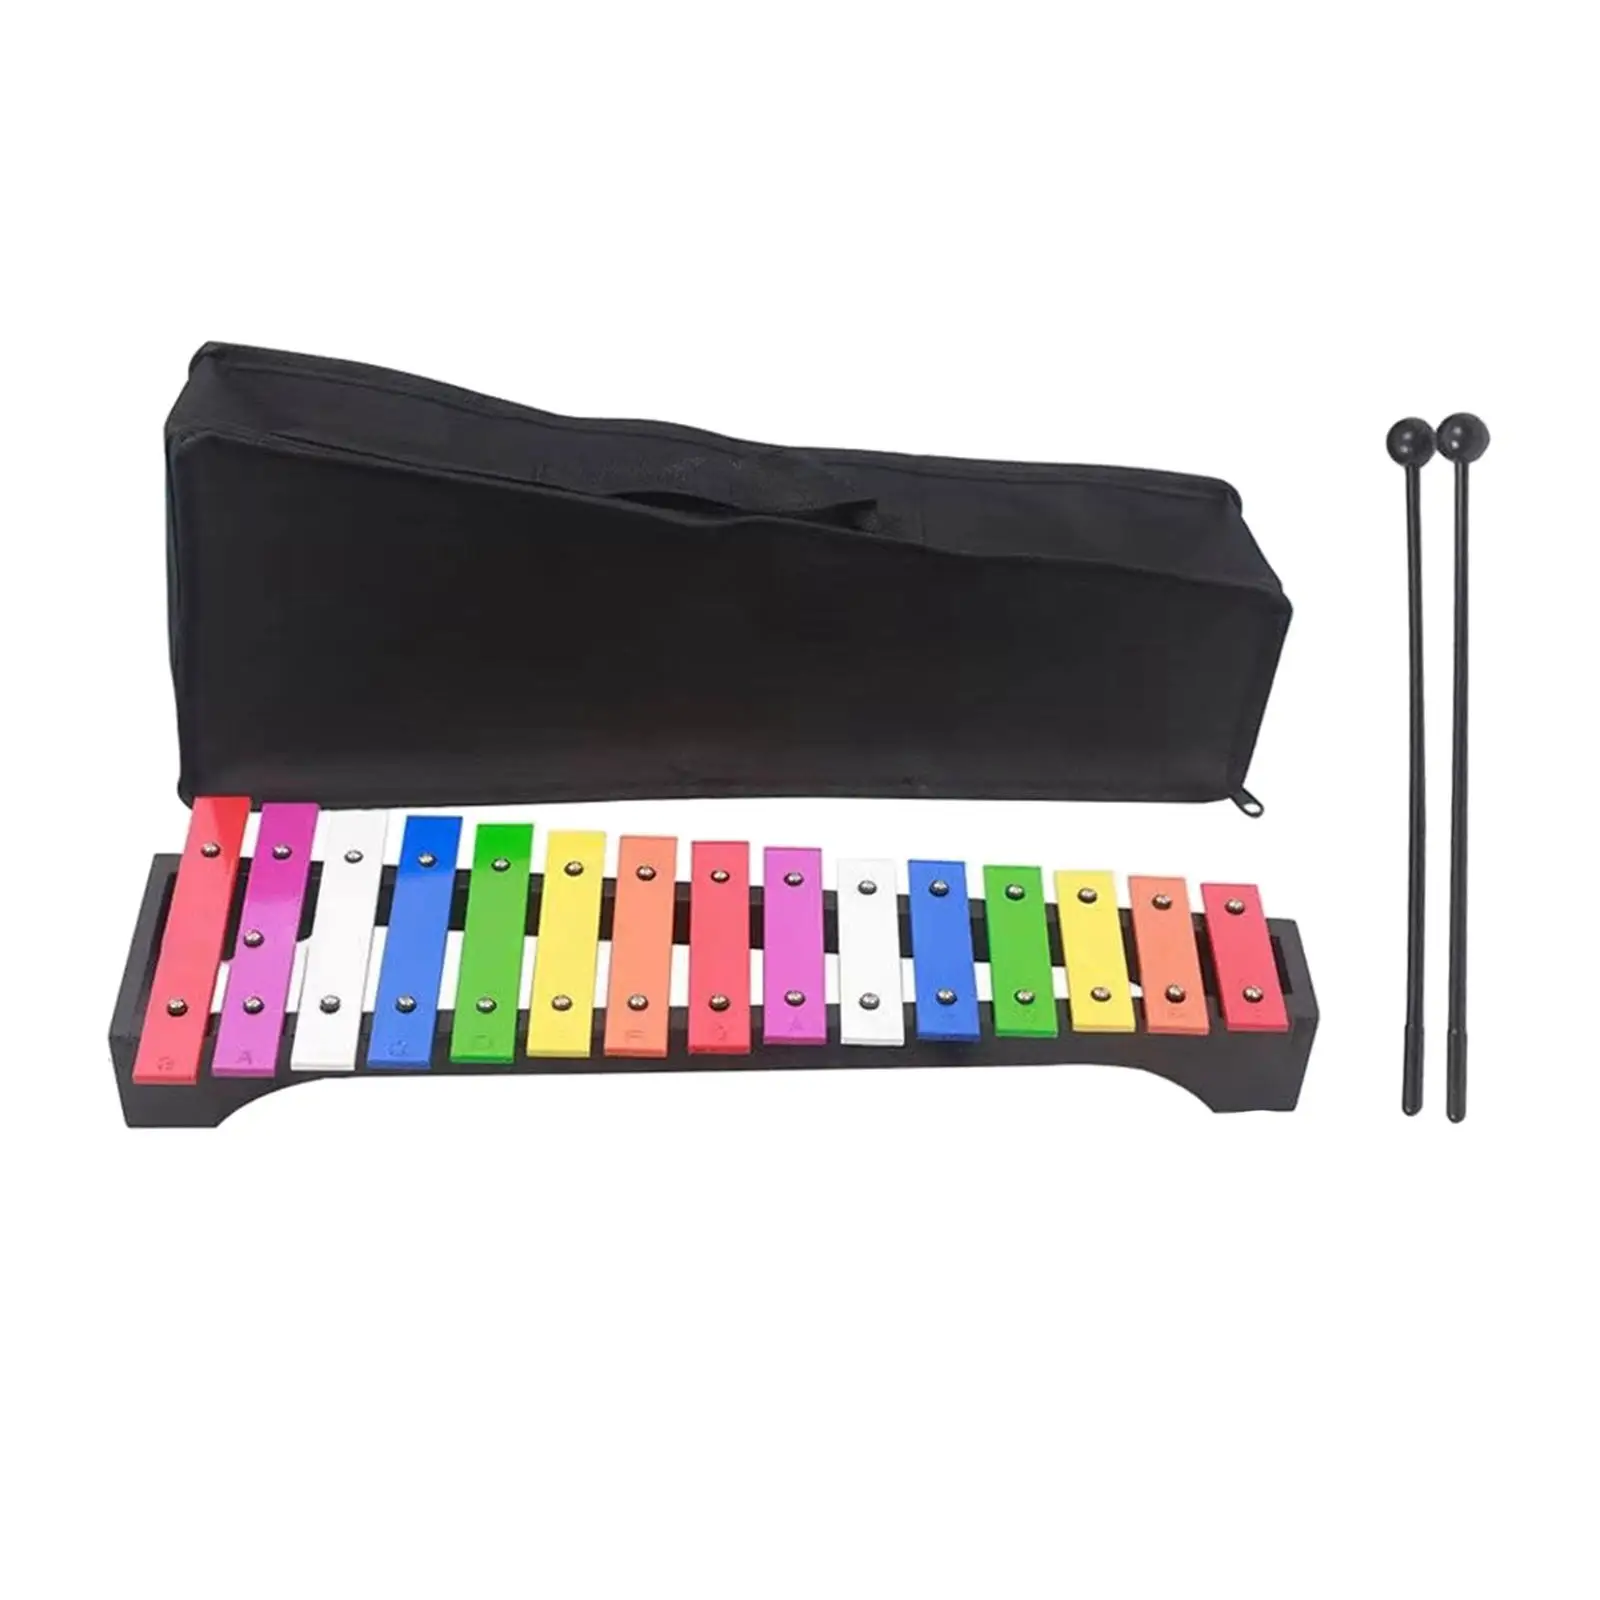 15 Note Glockenspiel Portable Wooden Percussion Toys Xylophone for Kids for Outside Concert Live Performance Event Music Lessons